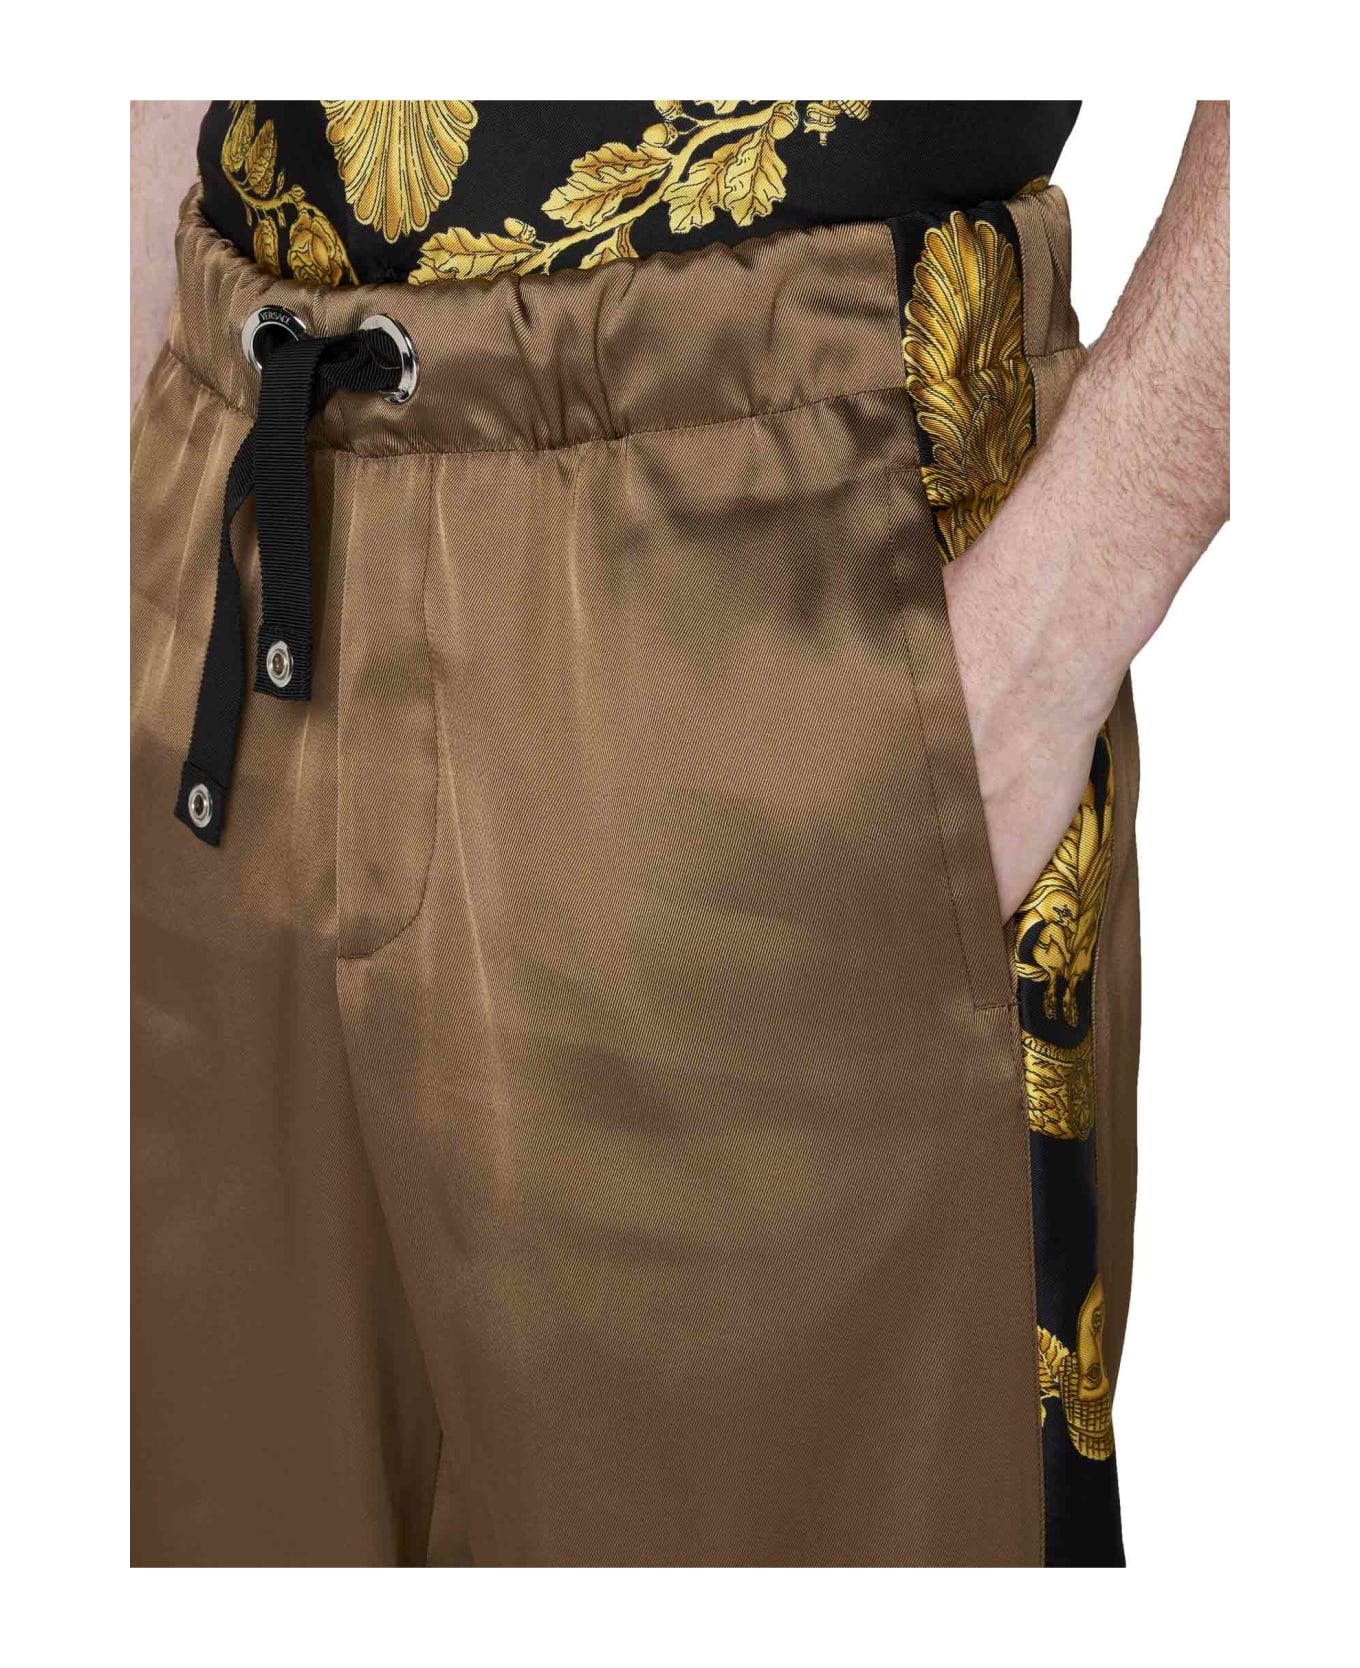 Versace Camel Trousers With Baroque Bands - Brown